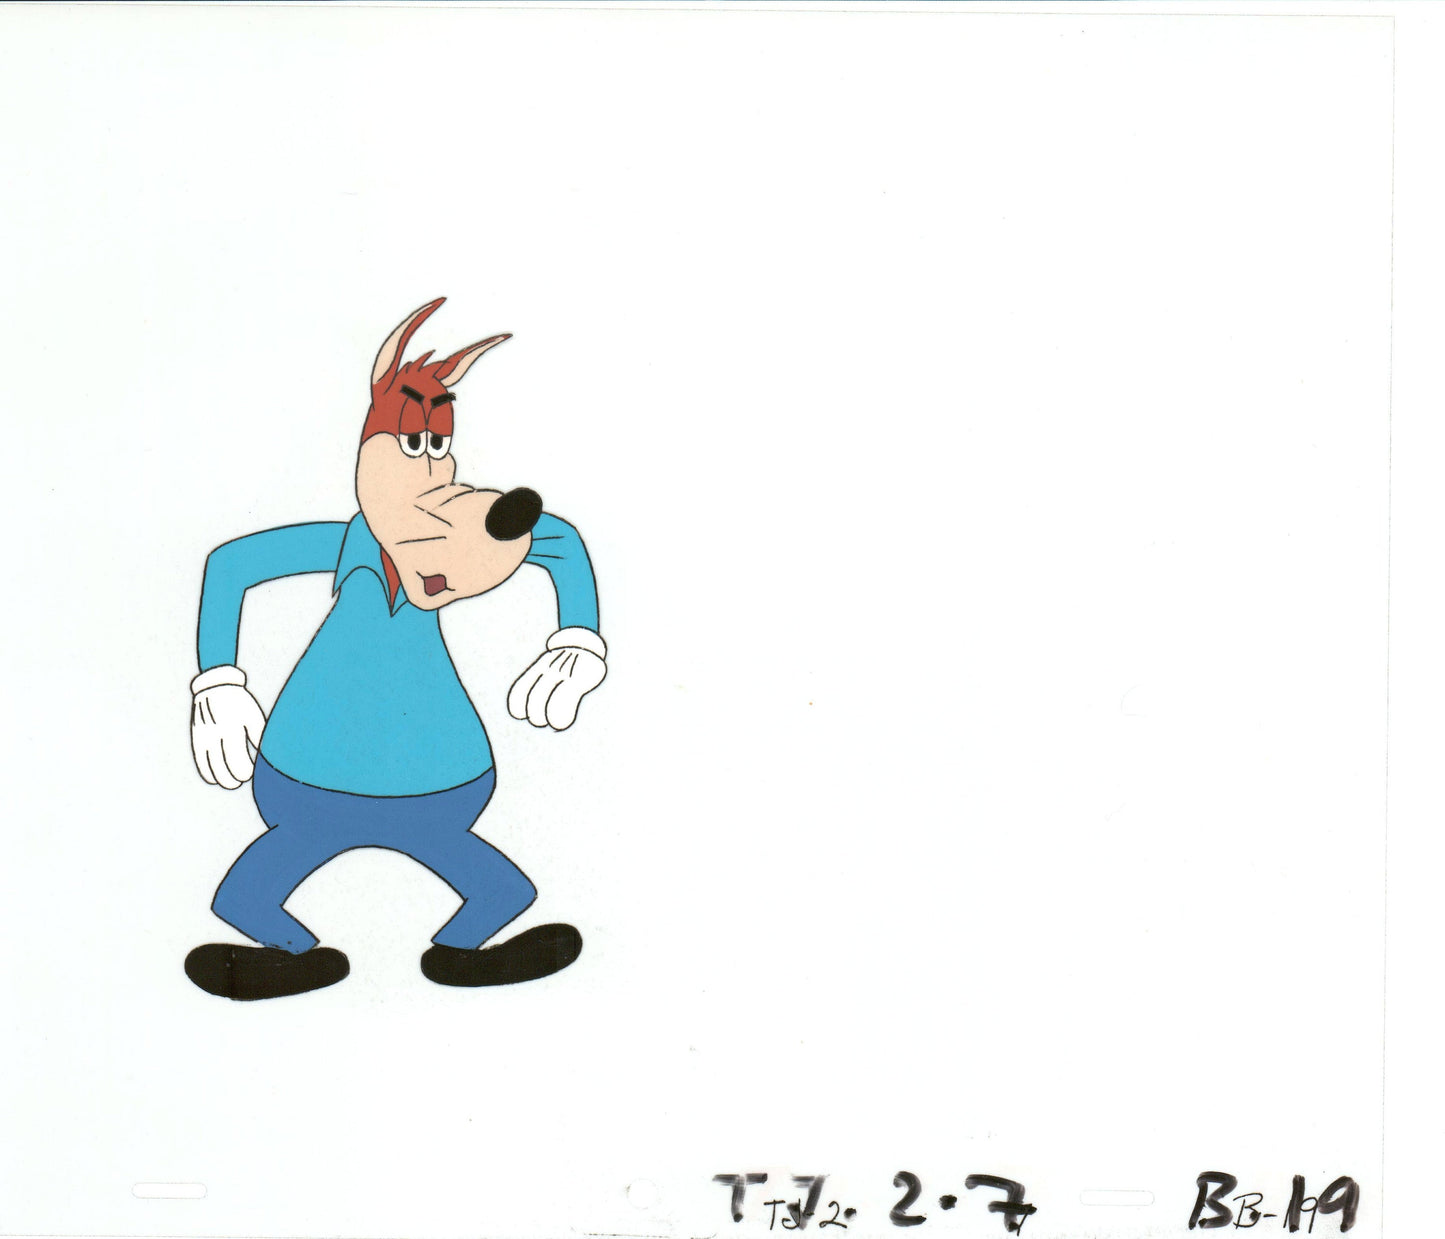 Tom & Jerry Original Production Animation Cel from Filmation 1980-82 b4379